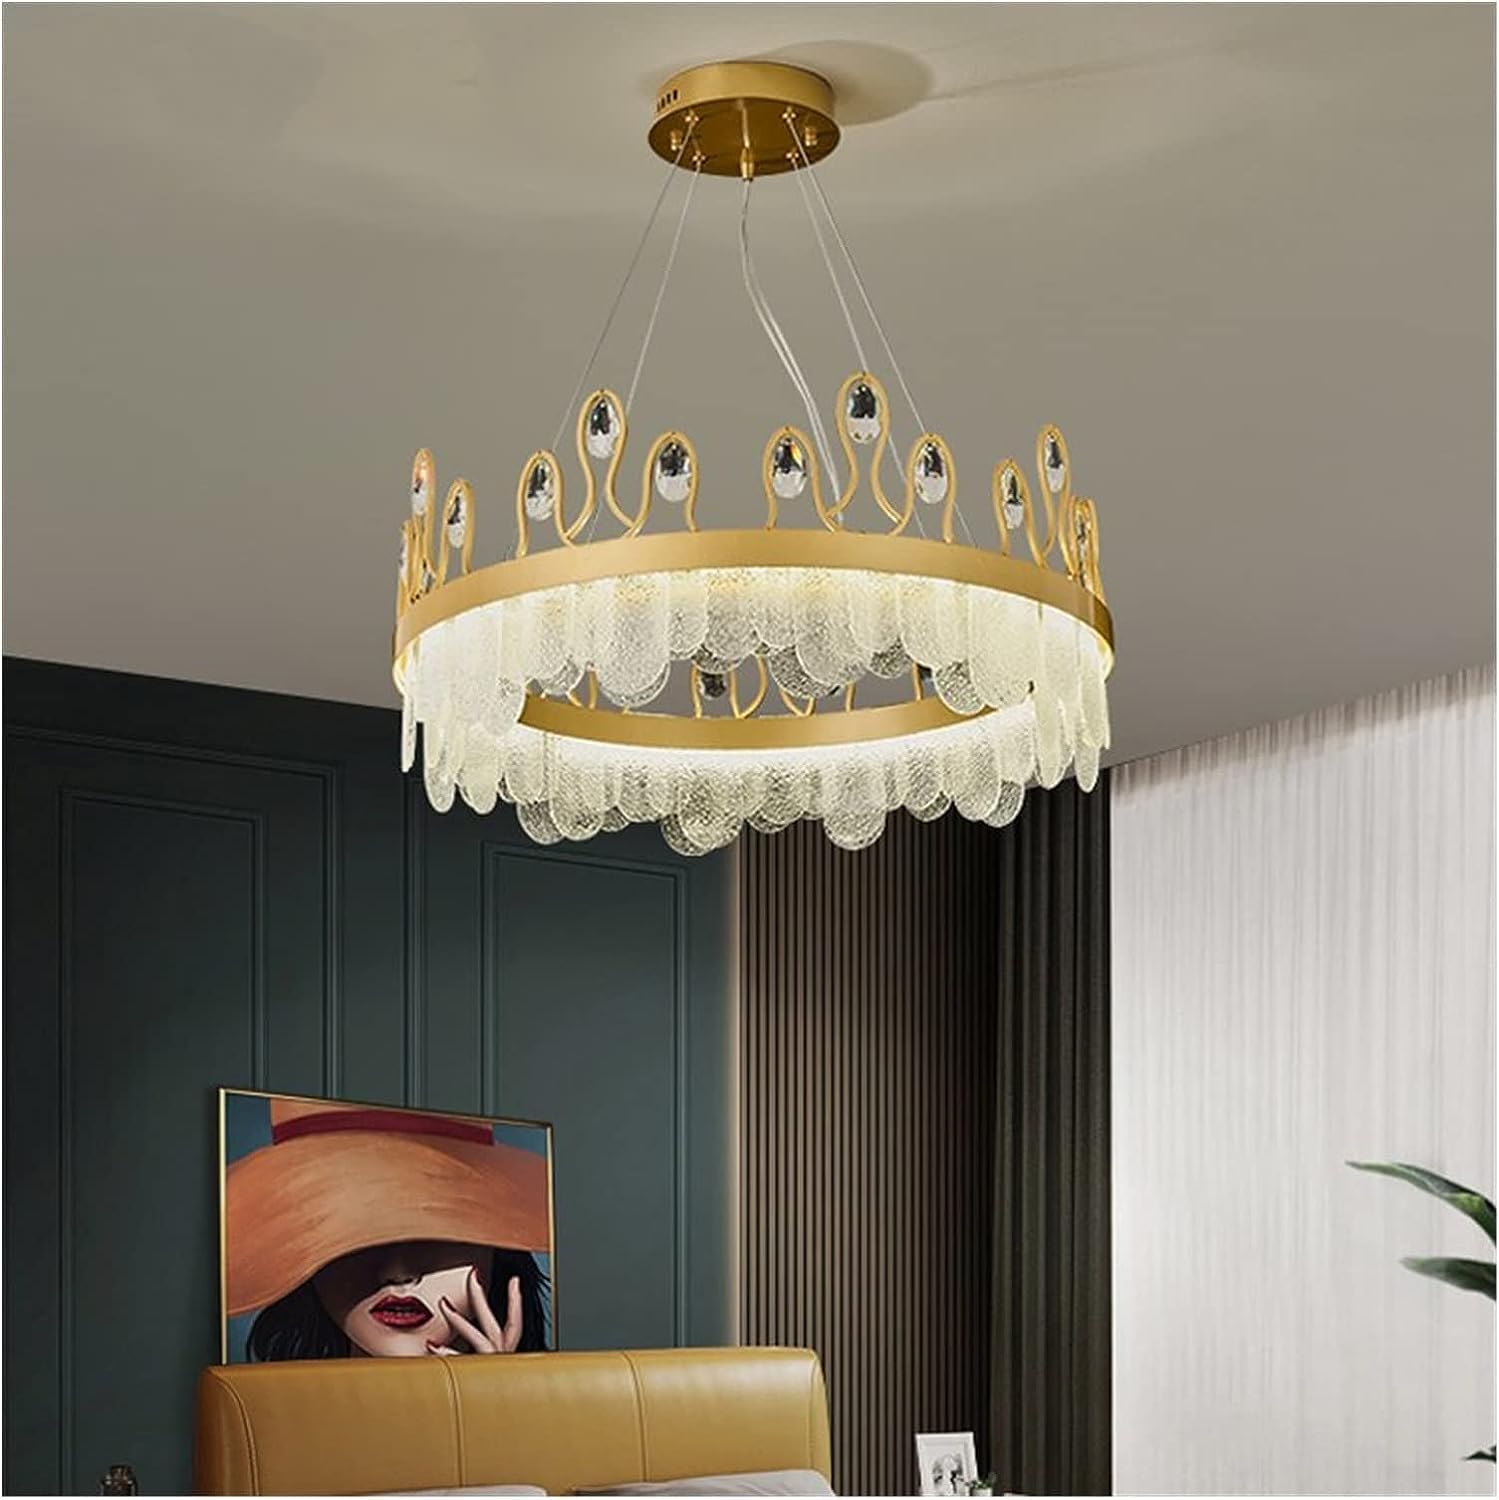 Buy Luxury Modern LED Crystal Crown Glass Pendant Chandelier 60cm - CL-09 | Shop at Supply Master Accra, Ghana Lamps & Lightings Buy Tools hardware Building materials